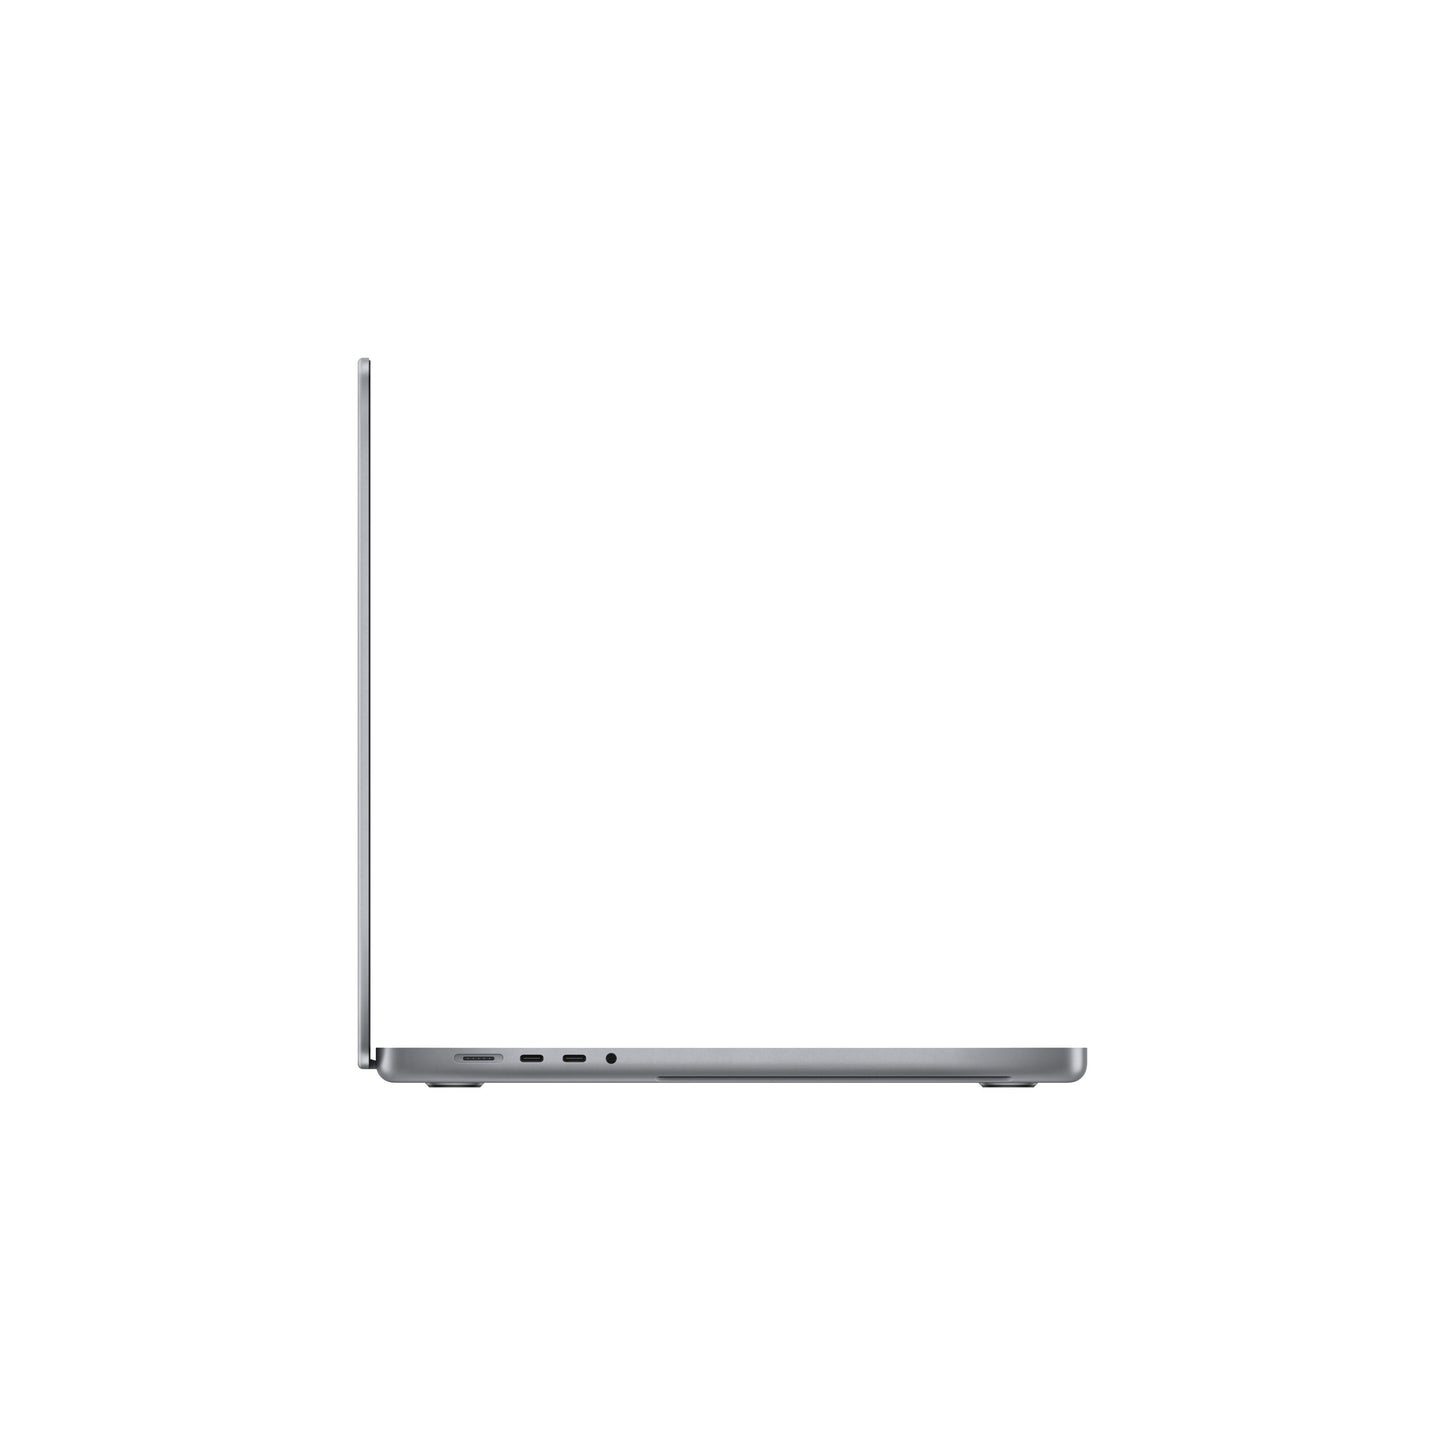 16-inch MacBook Pro: Apple M1 Pro chip with 10_core CPU and 16_core GPU 512GB SSD - Space Grey